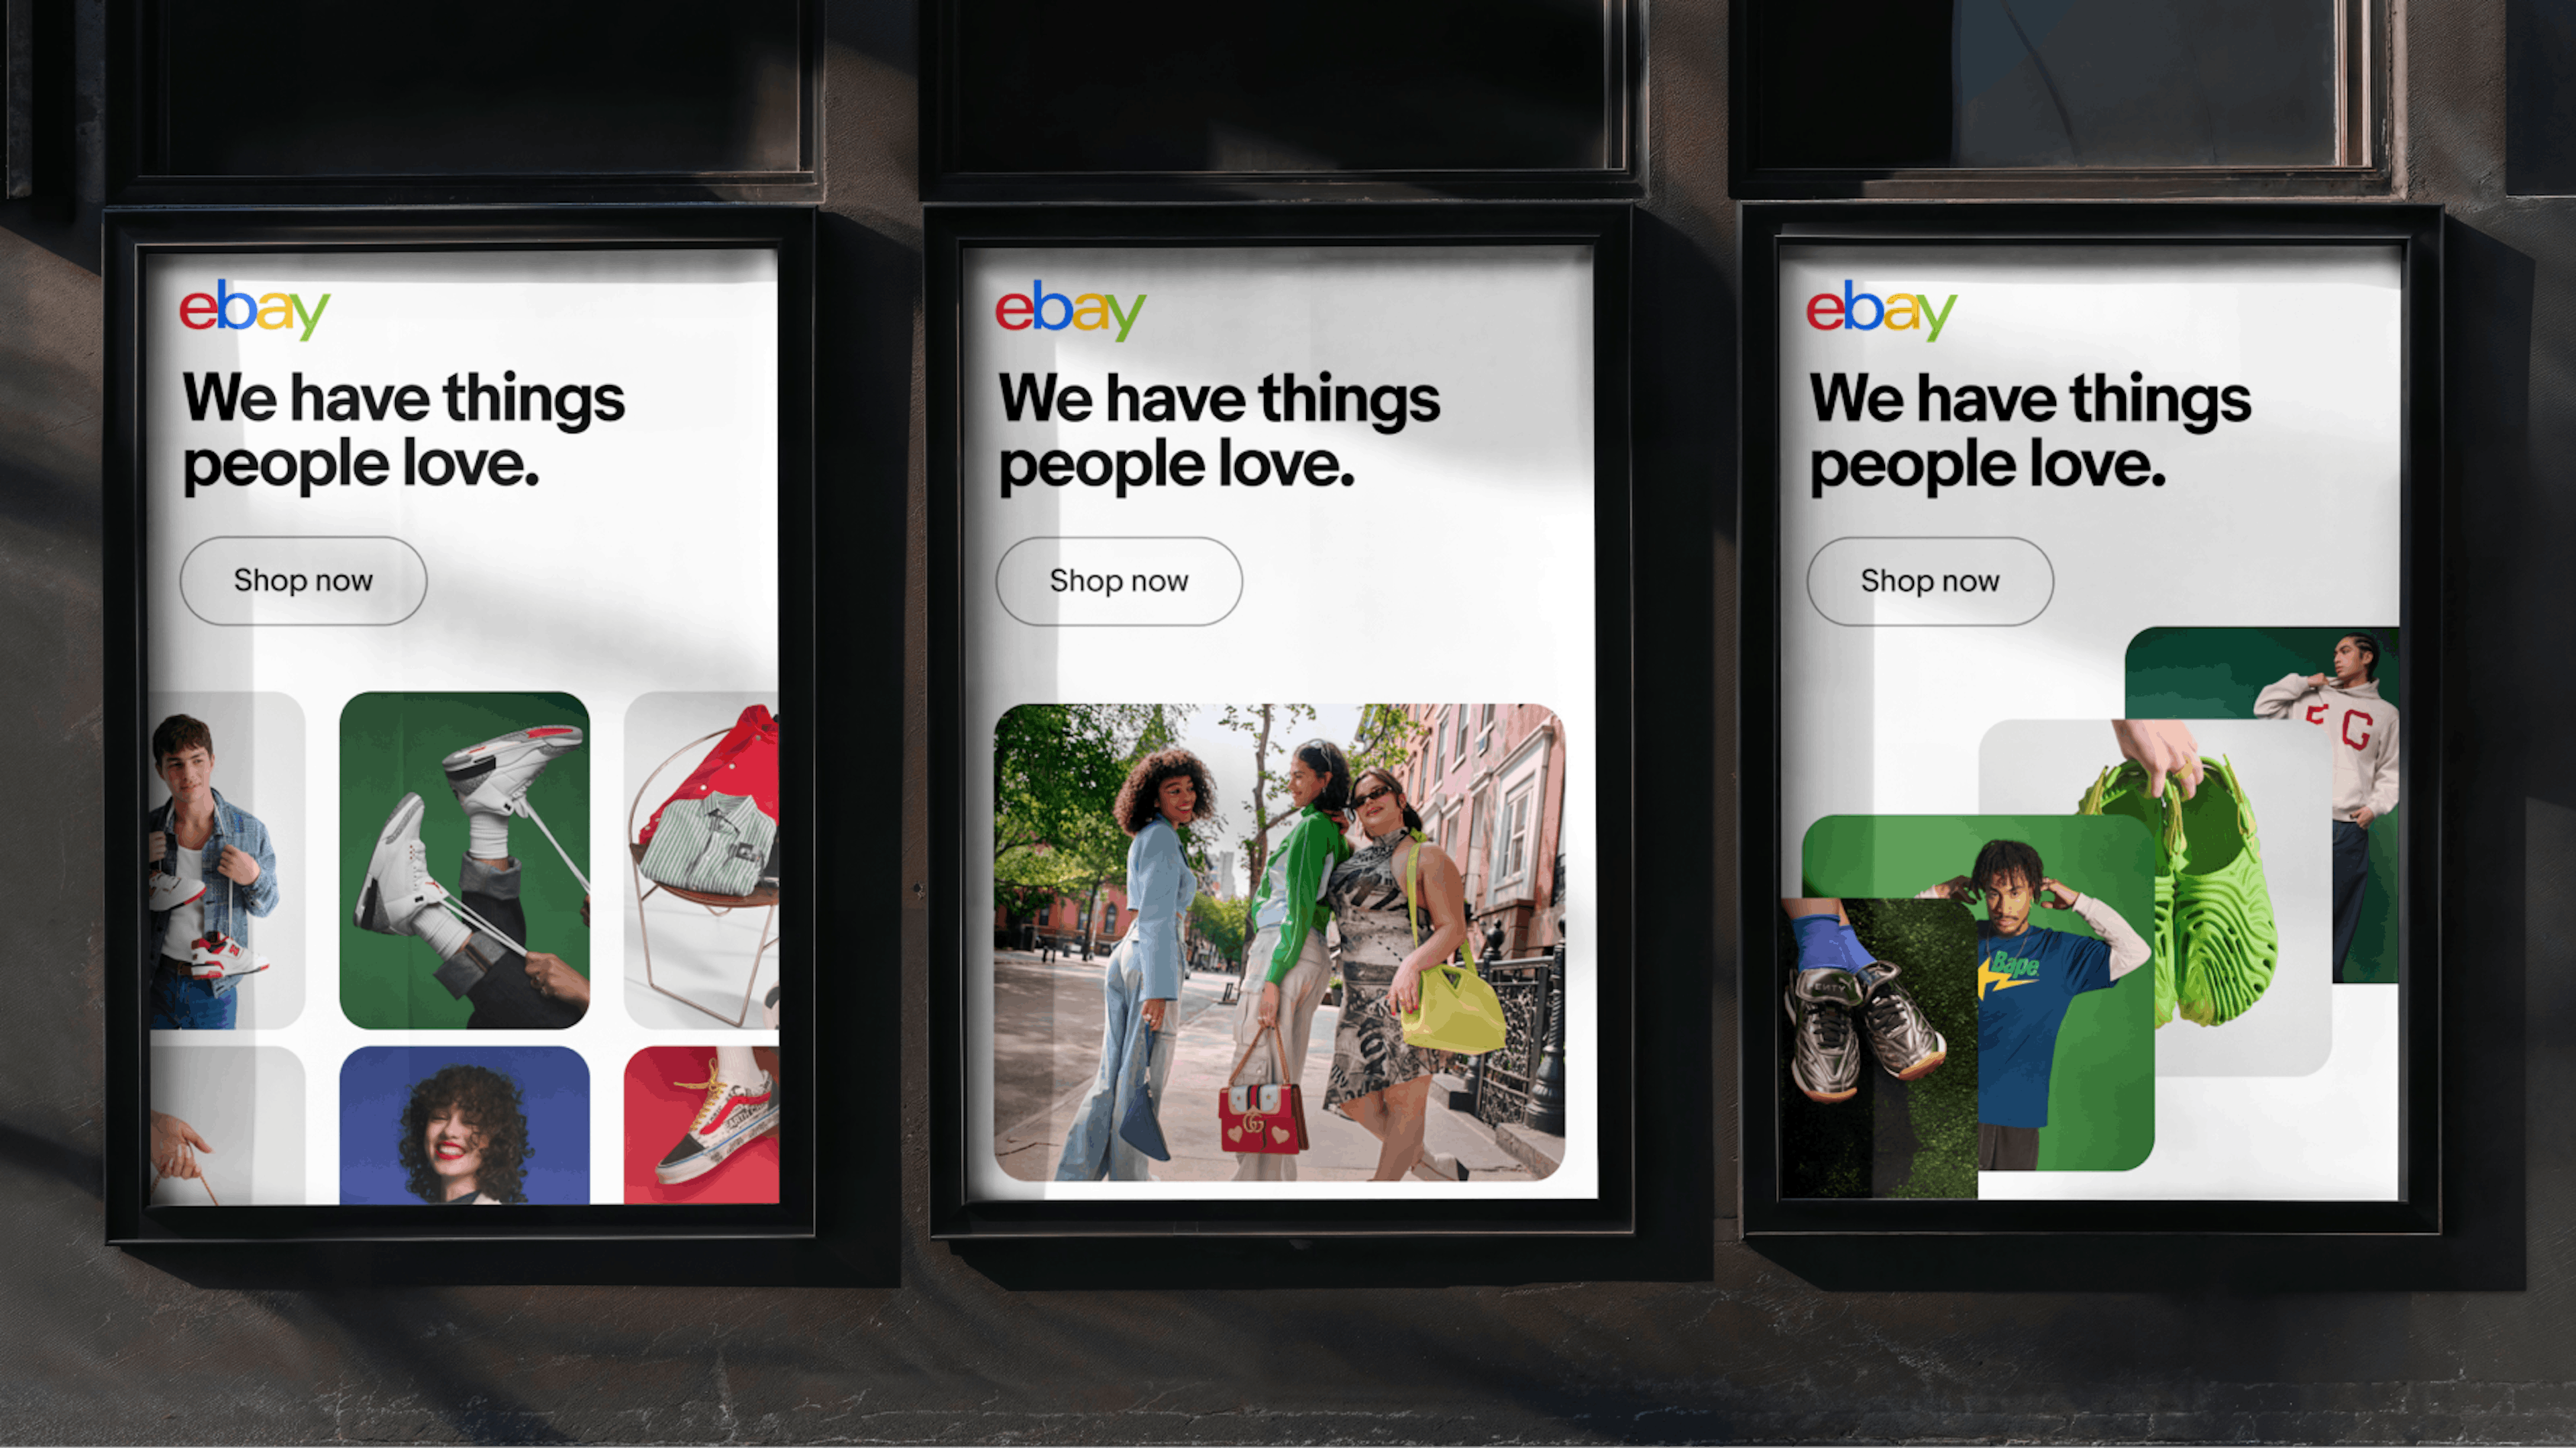 A series of printed posters inside glass frames on the side of a building. Each has the headline “We have things people love.” with a graphic button beneath it with “Shop now”. The images are a collection of sneaker, fashion, and streetwear in organic layouts across each.